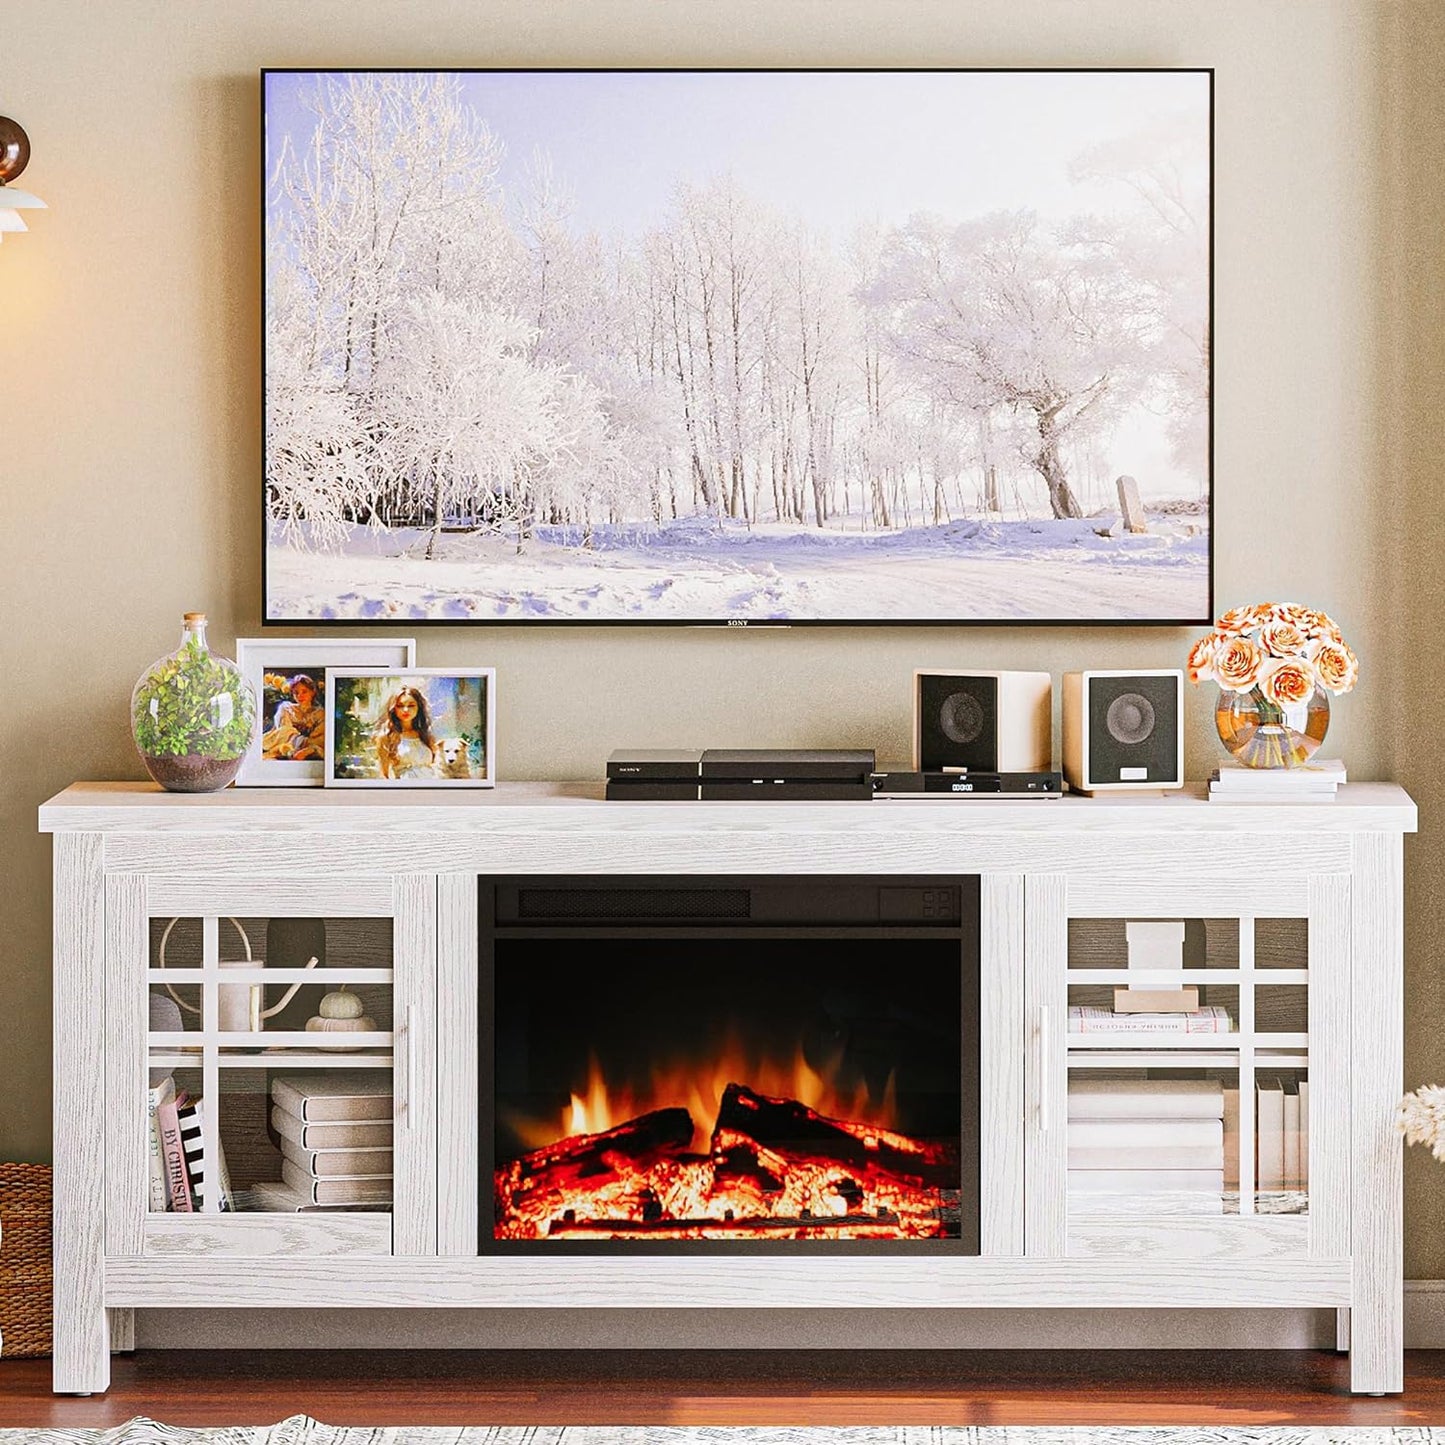 IRONCK 59” TV Stand with 23” Electric Fireplace